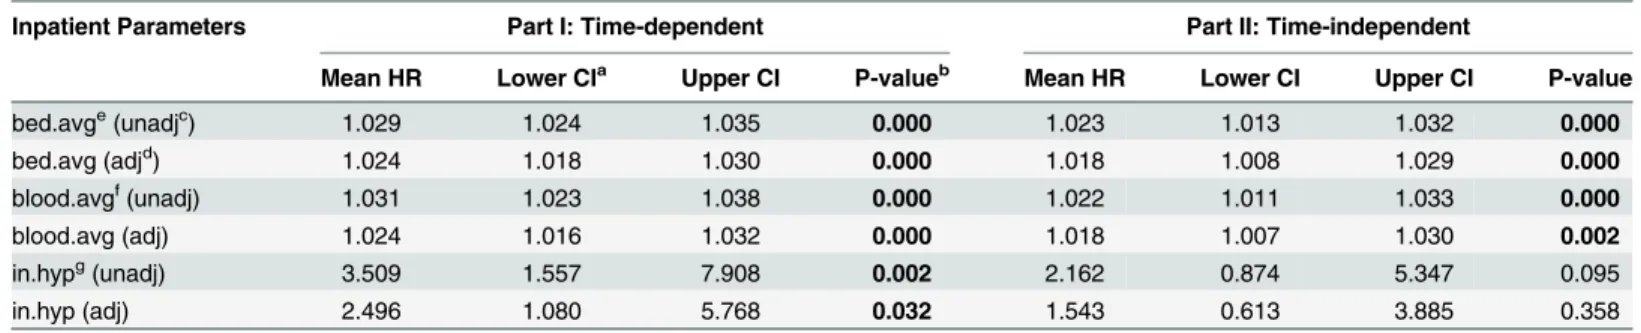 Table 10 summarizes the results obtained from our statistical methods. Based on Table 10, the average bed and blood glucose results are significantly associated with both the first and the recurrent incidence of hyperglycemia